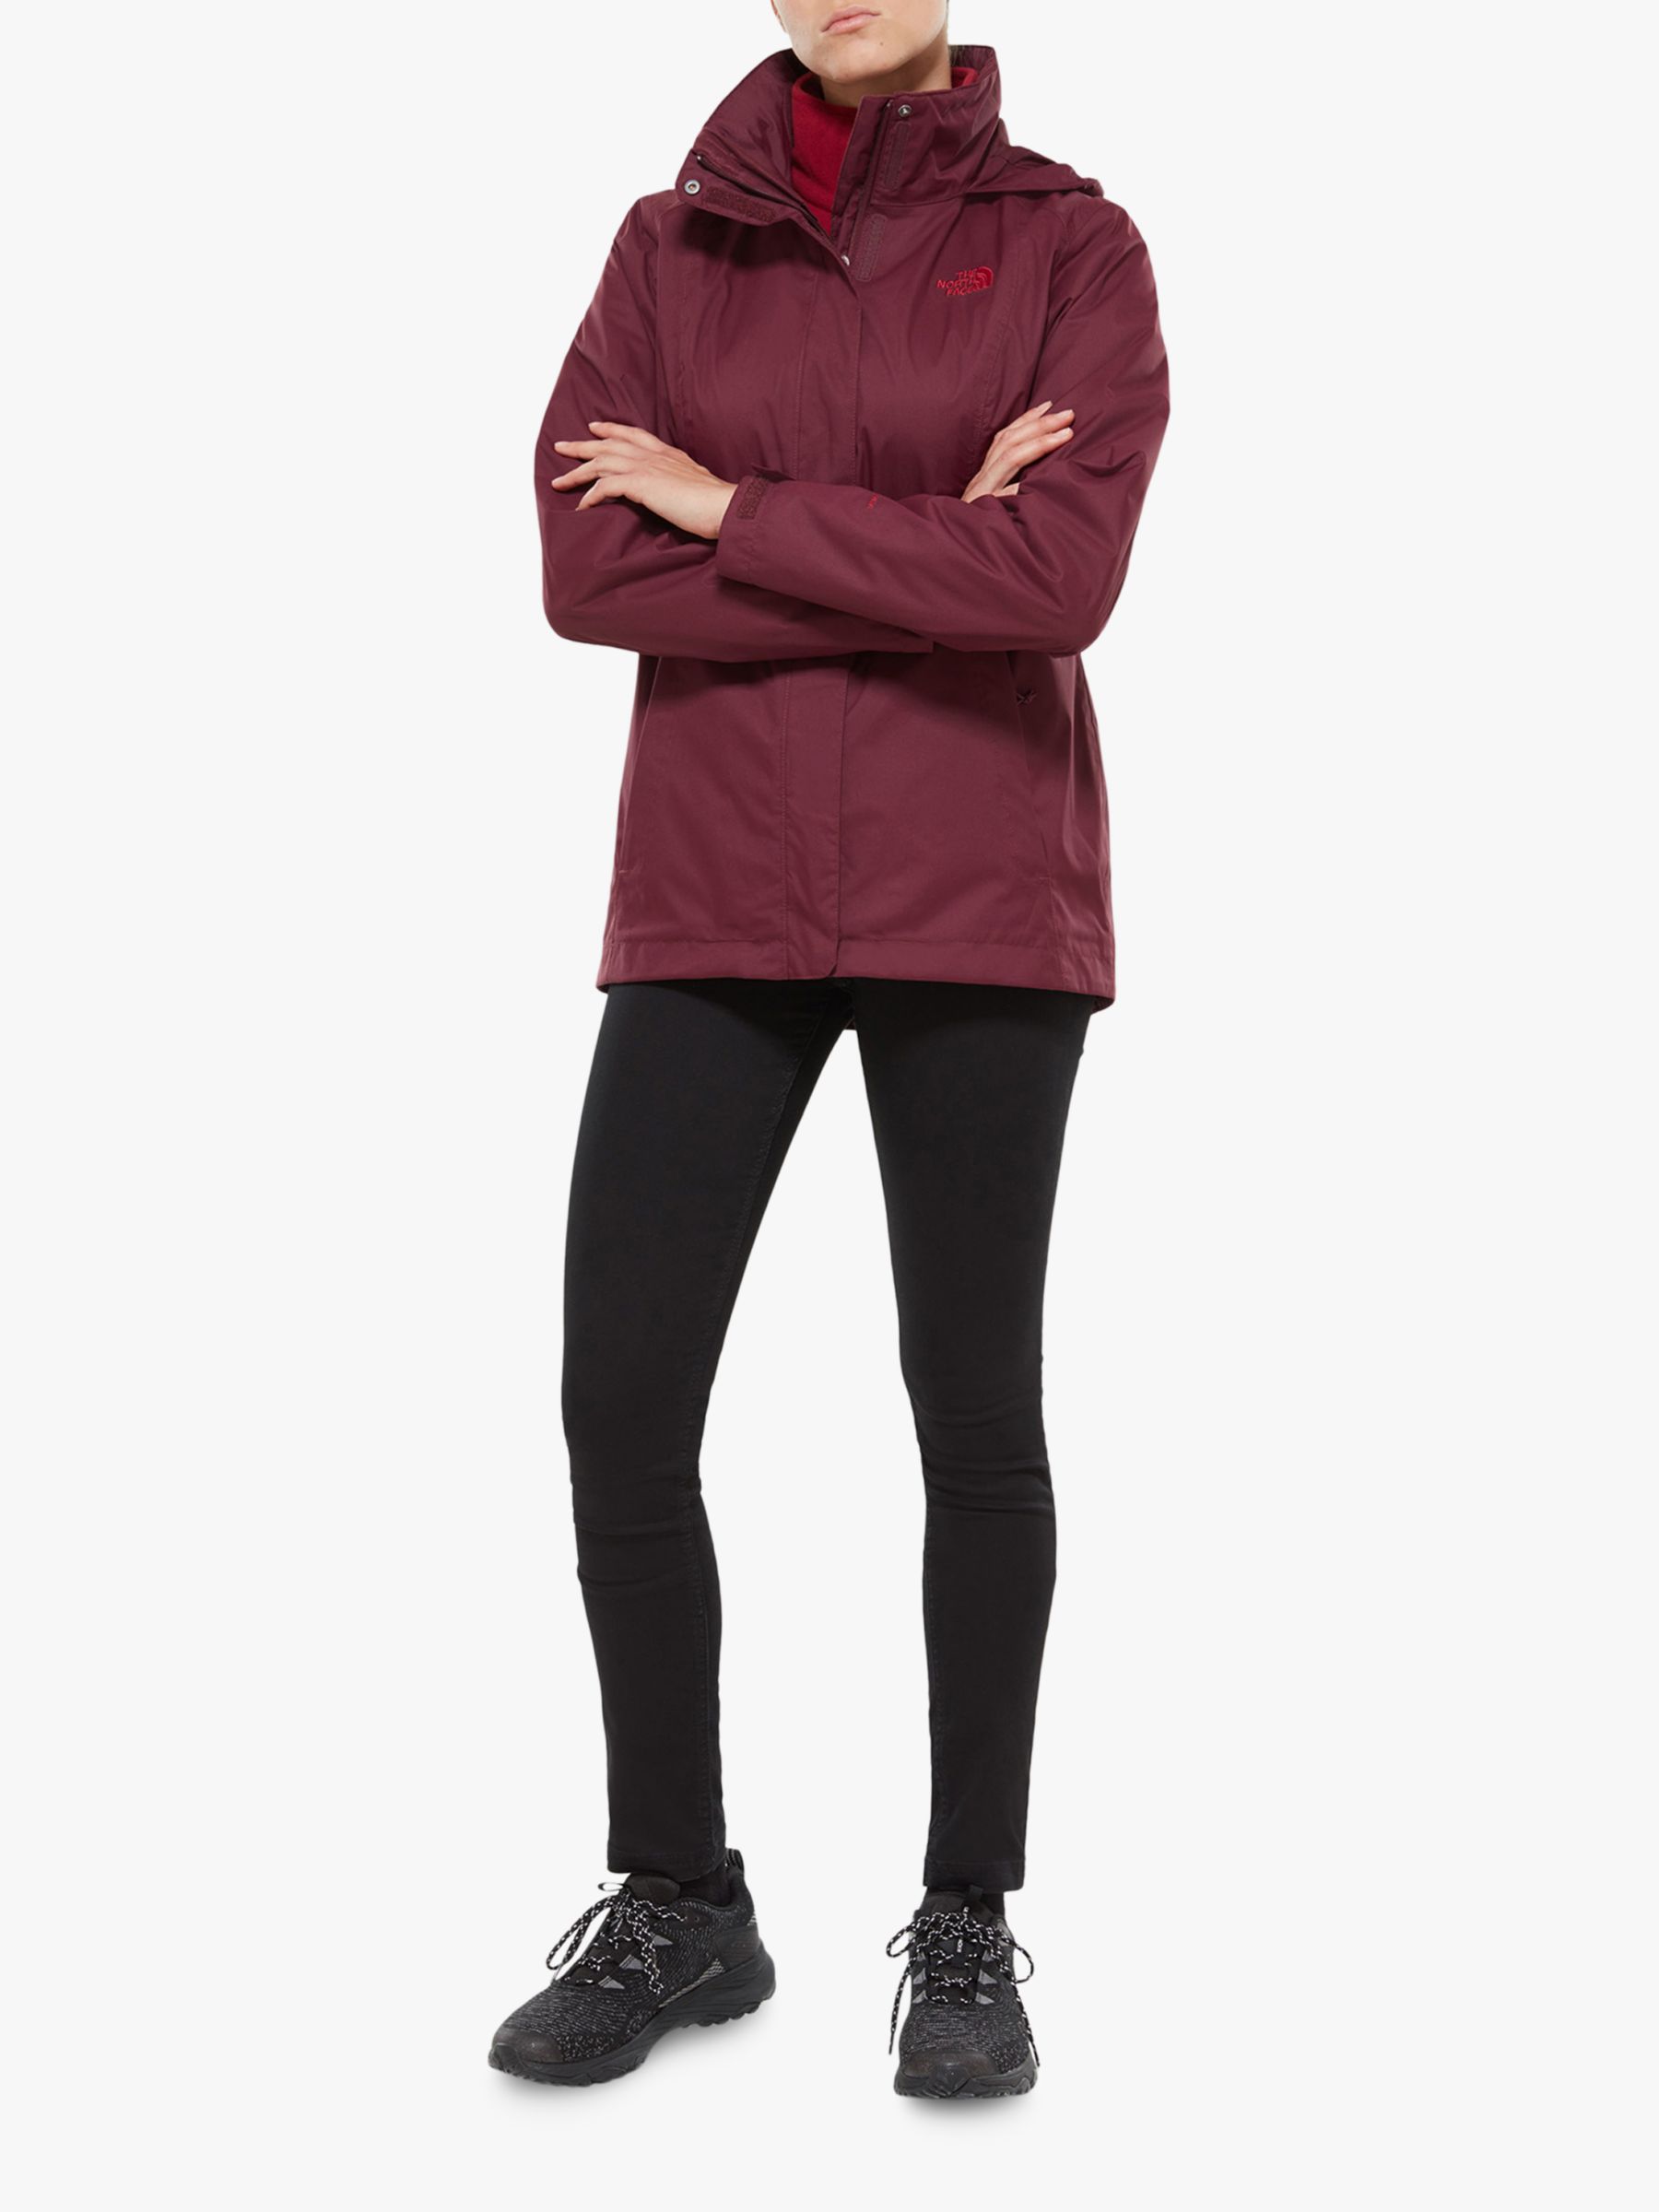 The North Face Evolve Triclimate Women S Jacket Fig Brown Rumba Red At John Lewis Partners